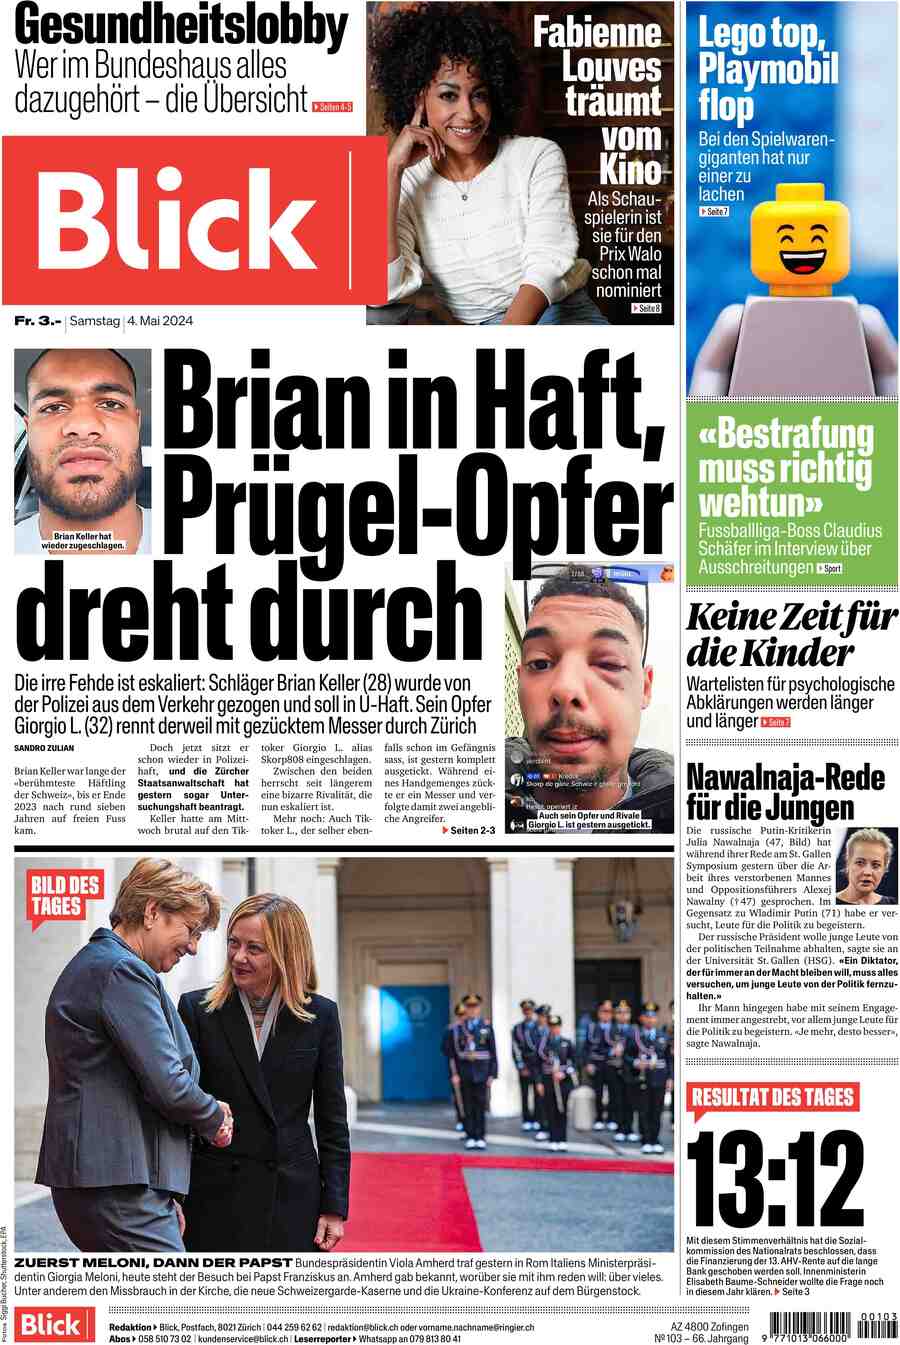 Blick - Front Page - 05/04/2024